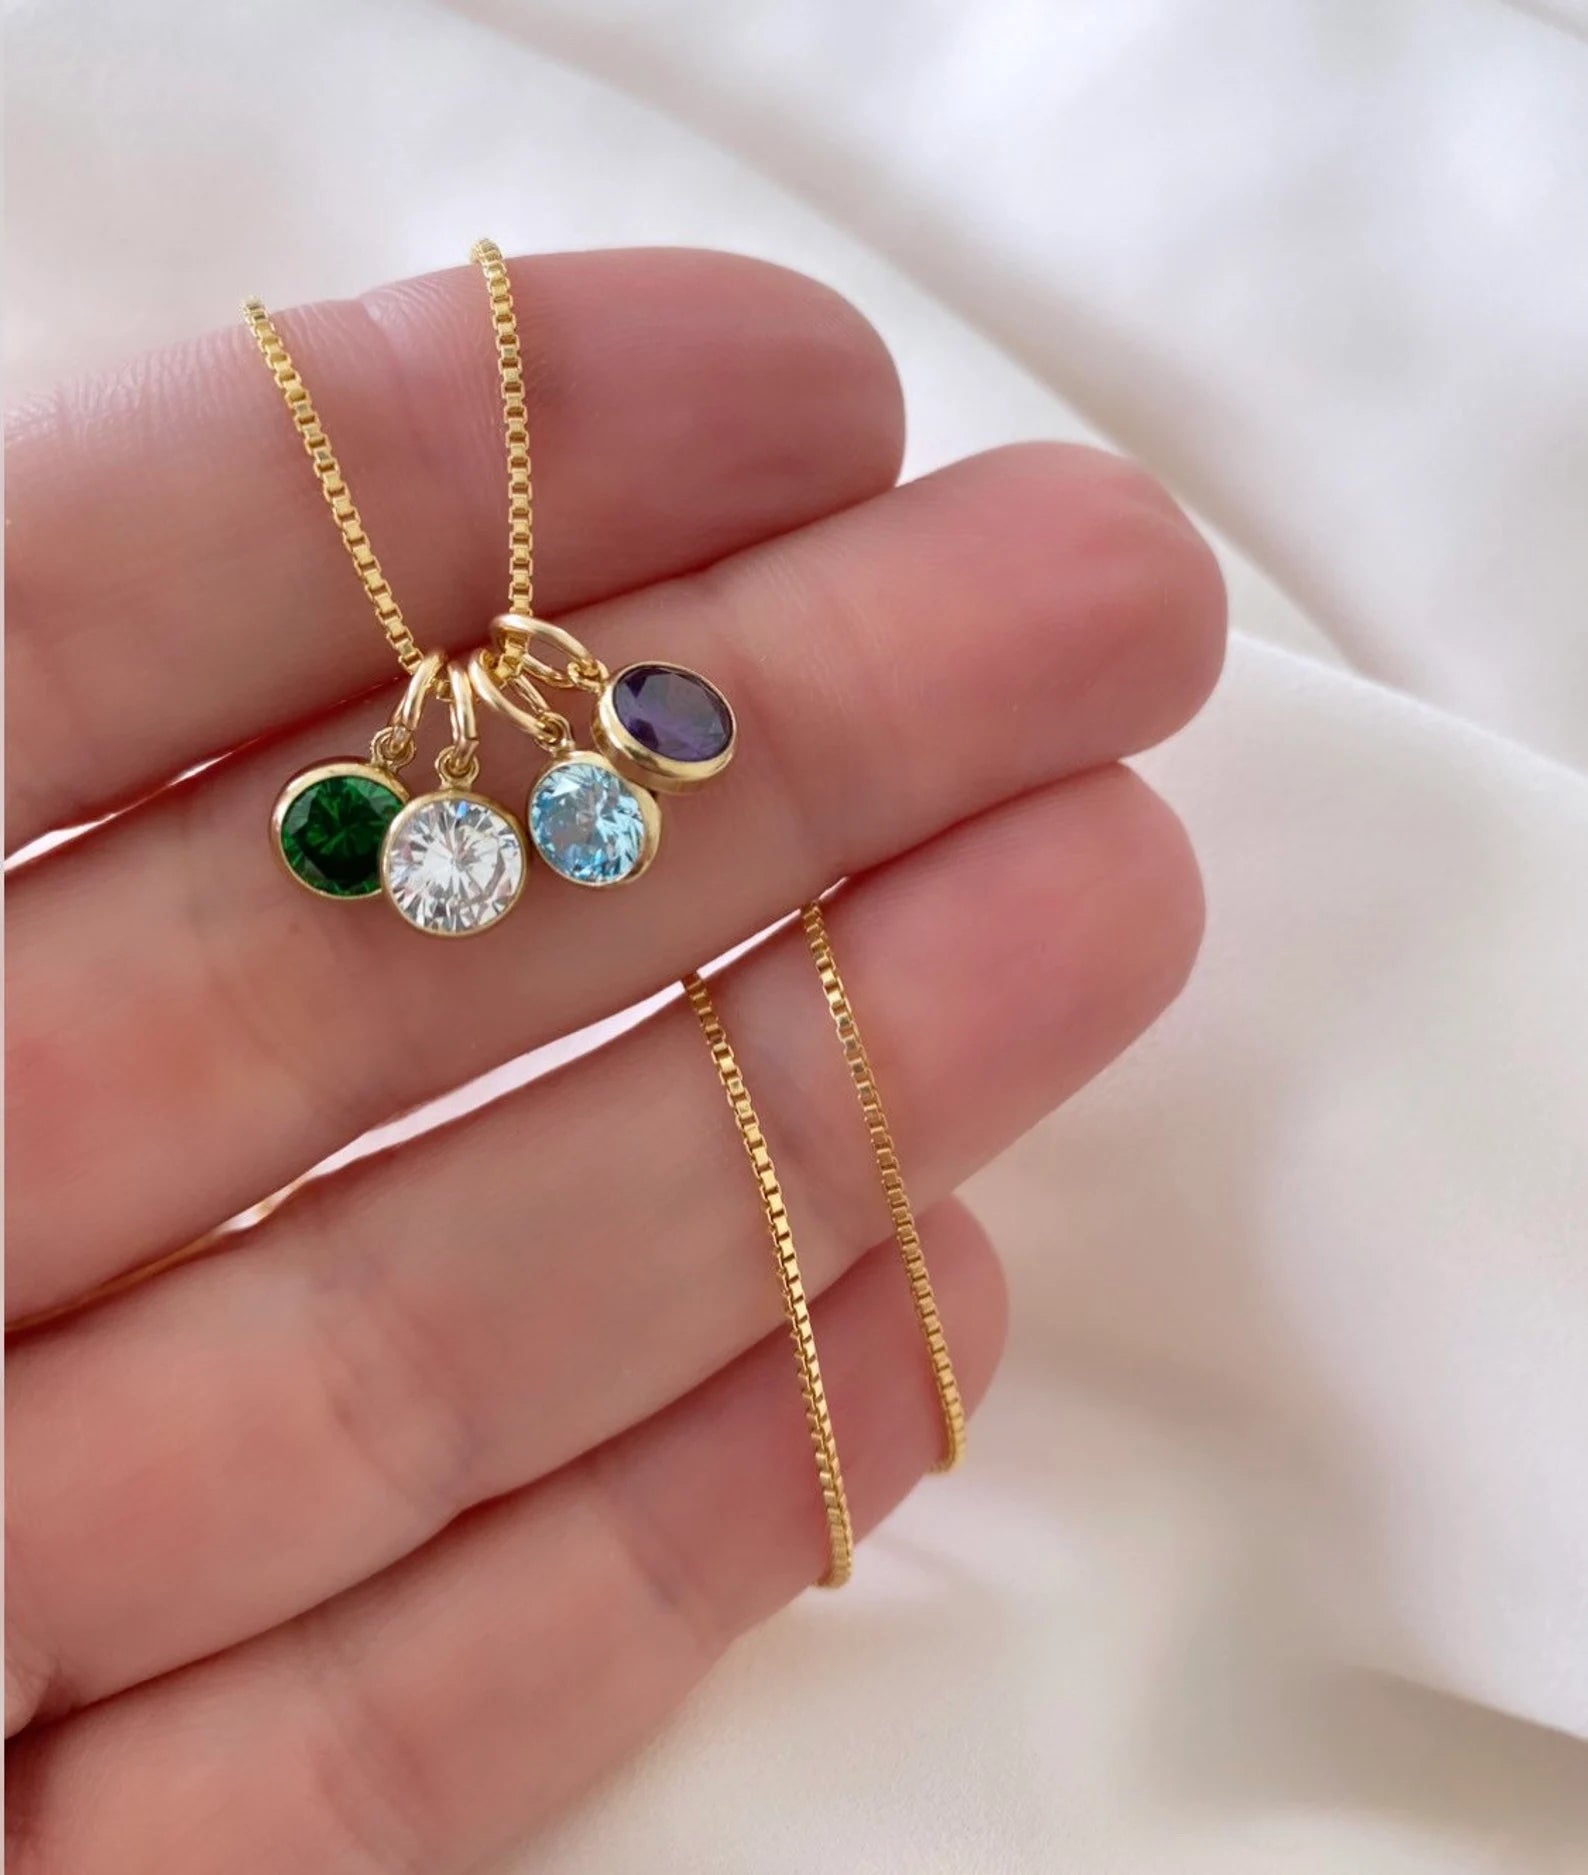 Birthstone Charm Necklace - Gold Filled - Dainty Coin Pendant